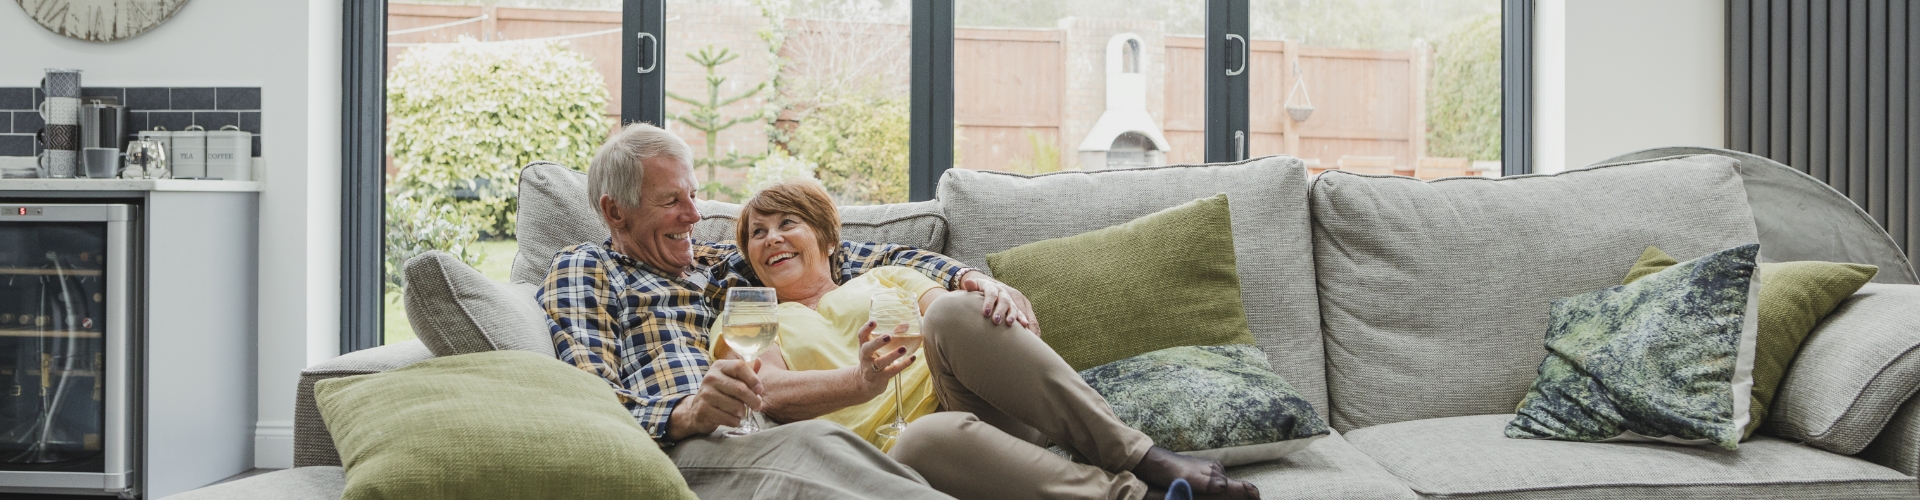 a man and woman sit on a couch holding wine glasses